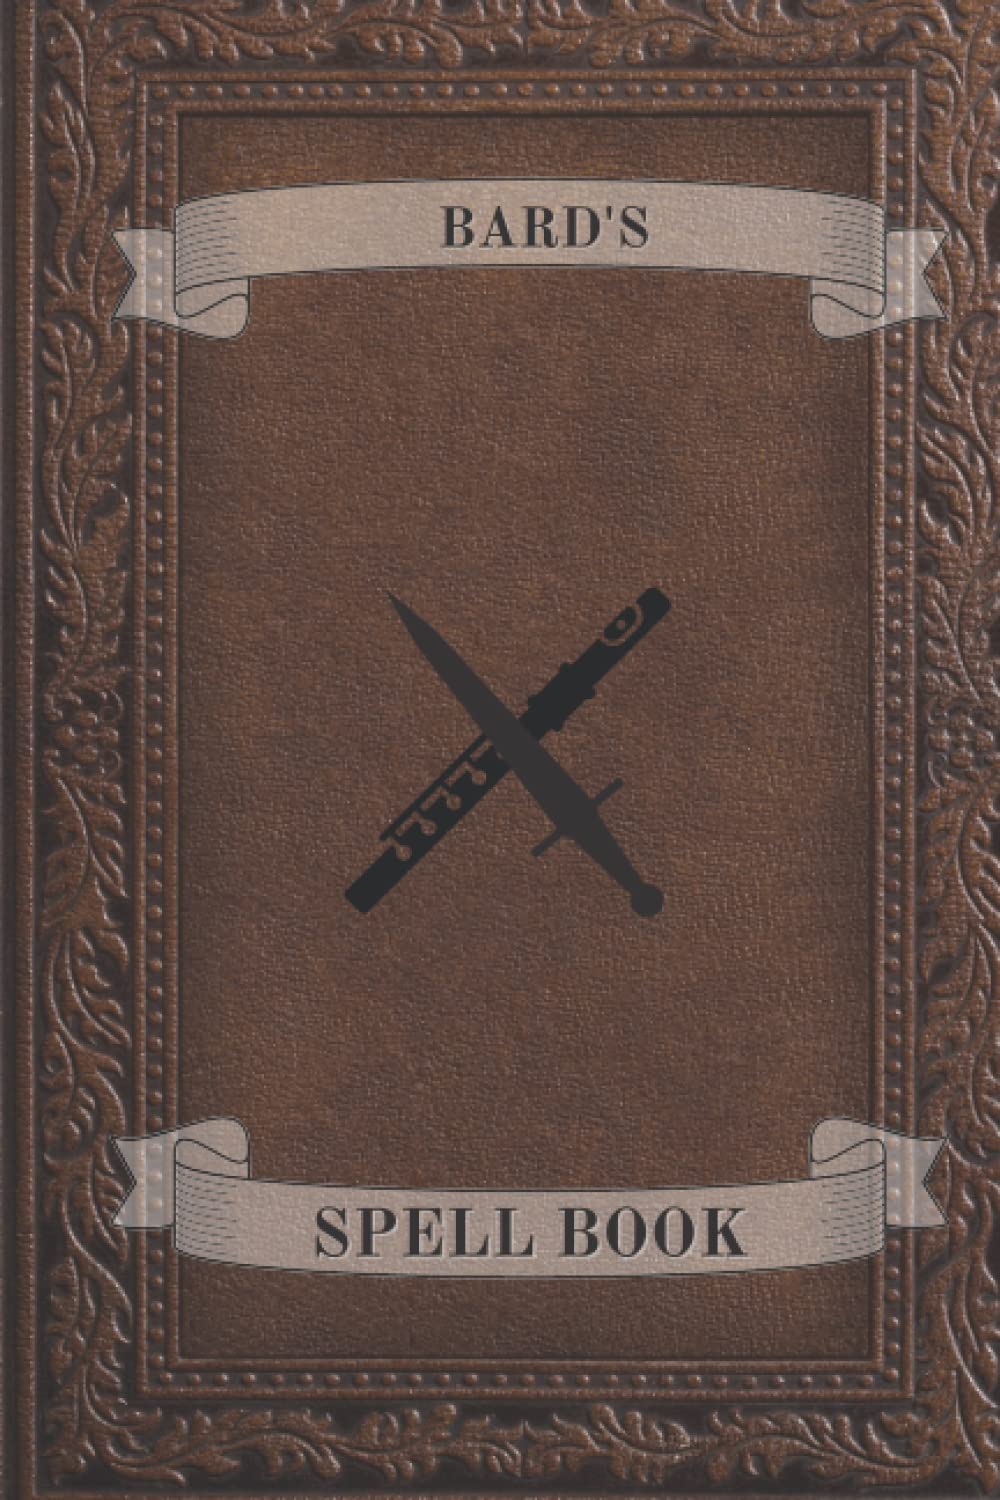 Bard's Spellbook: 100 Page Fantasy D&D Themed Character Spellbook.